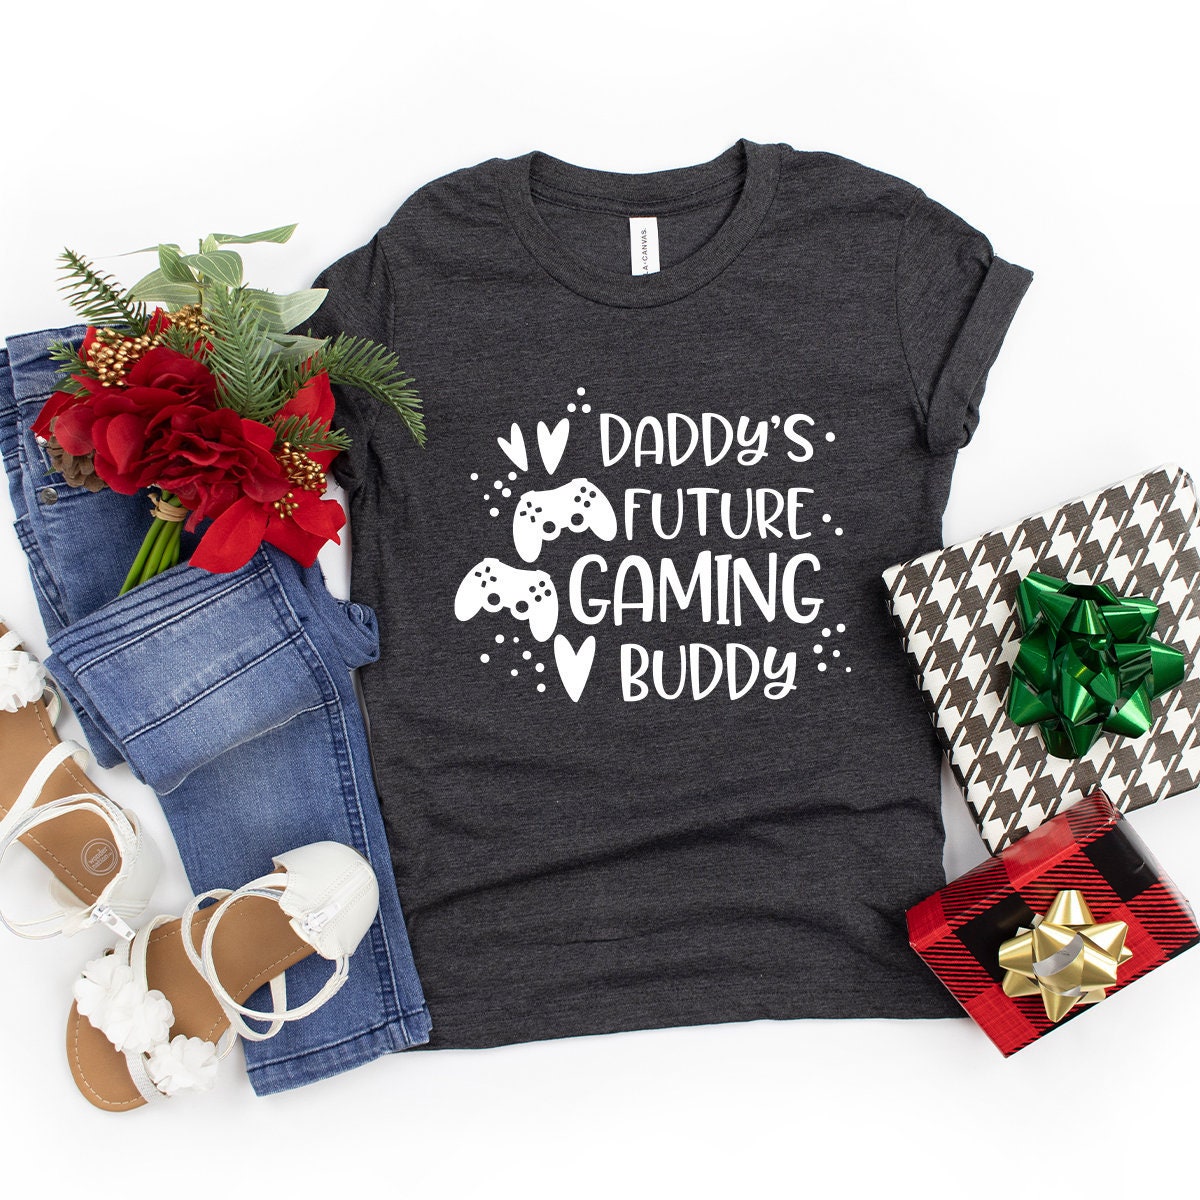 Daddy Gamer T Shirt, Daddy And Baby Shirt, Funny Baby Shirt, Daddy's Gaming Buddy Shirt, New Dad T-Shirt, Gift For Dad, Daddy and Me Shirt - Fastdeliverytees.com